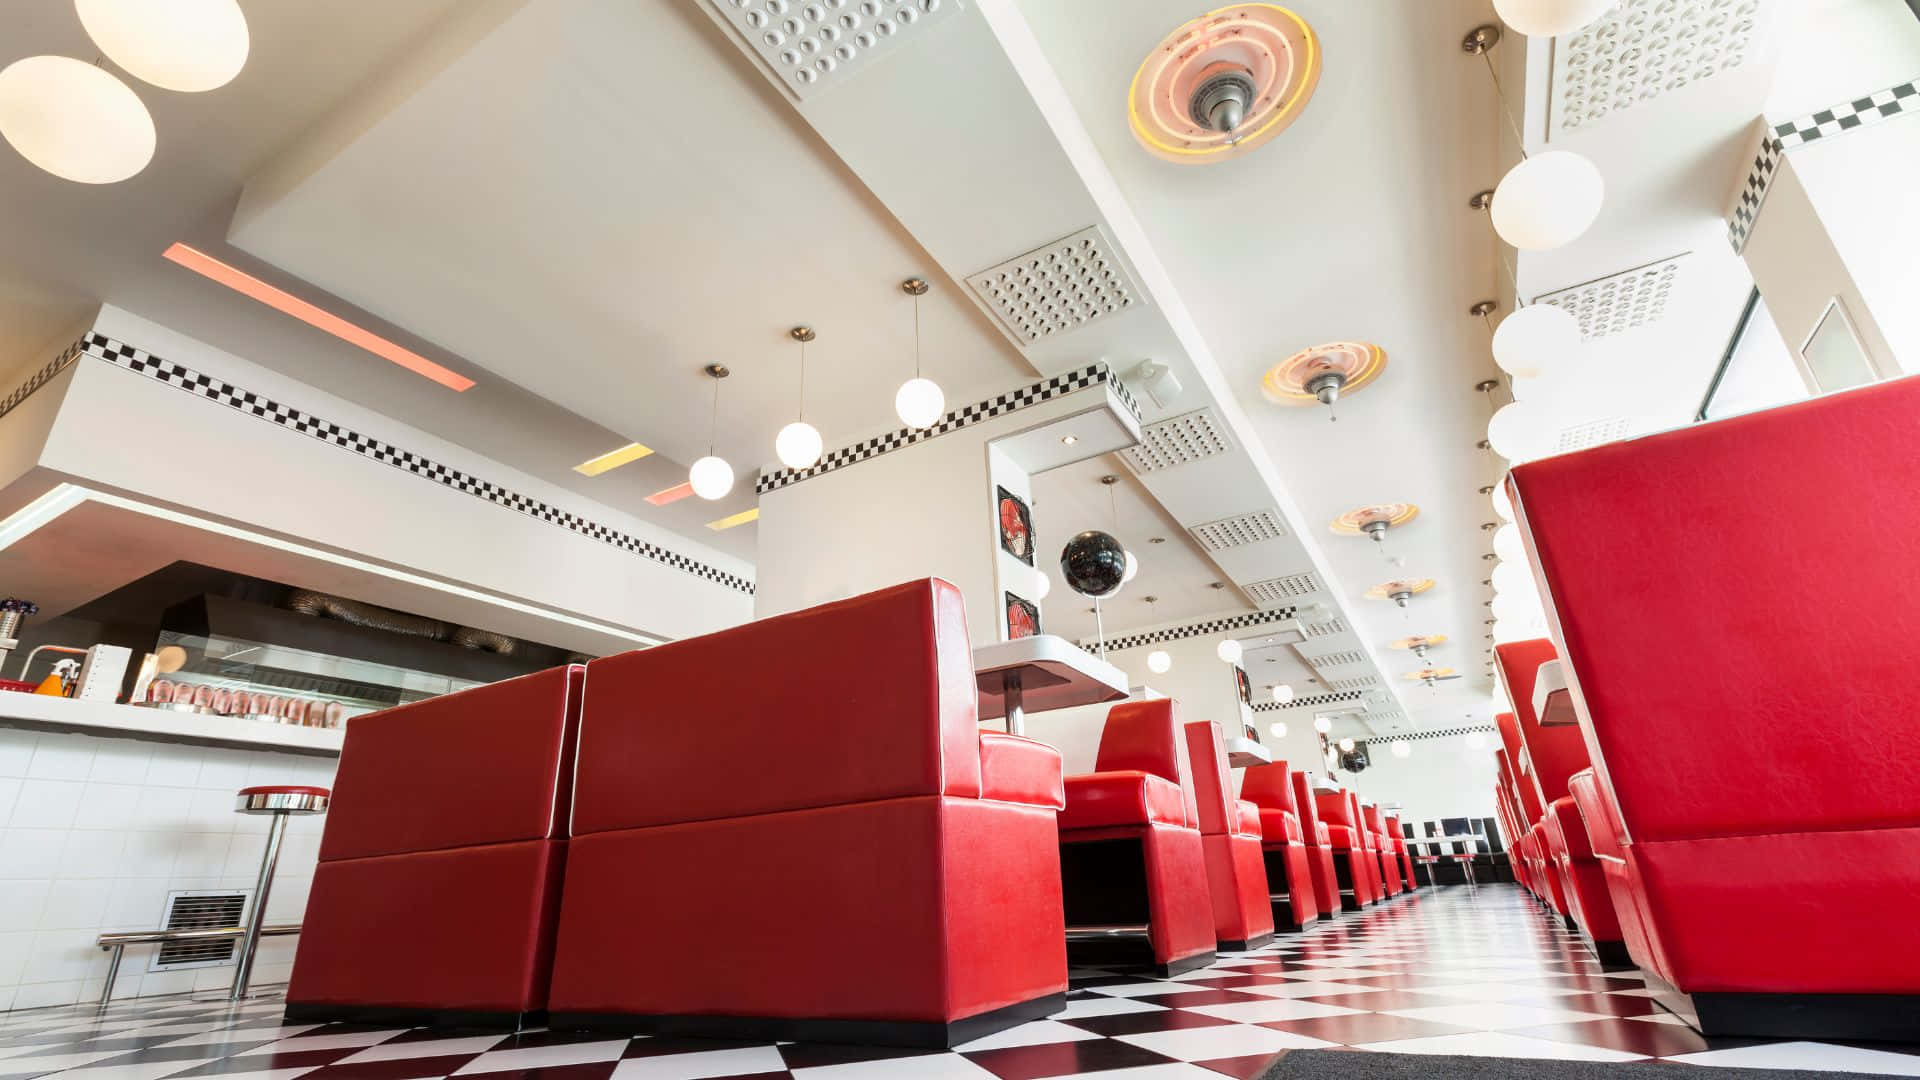 Retro Diner Ambiance: A Journey Back in Time